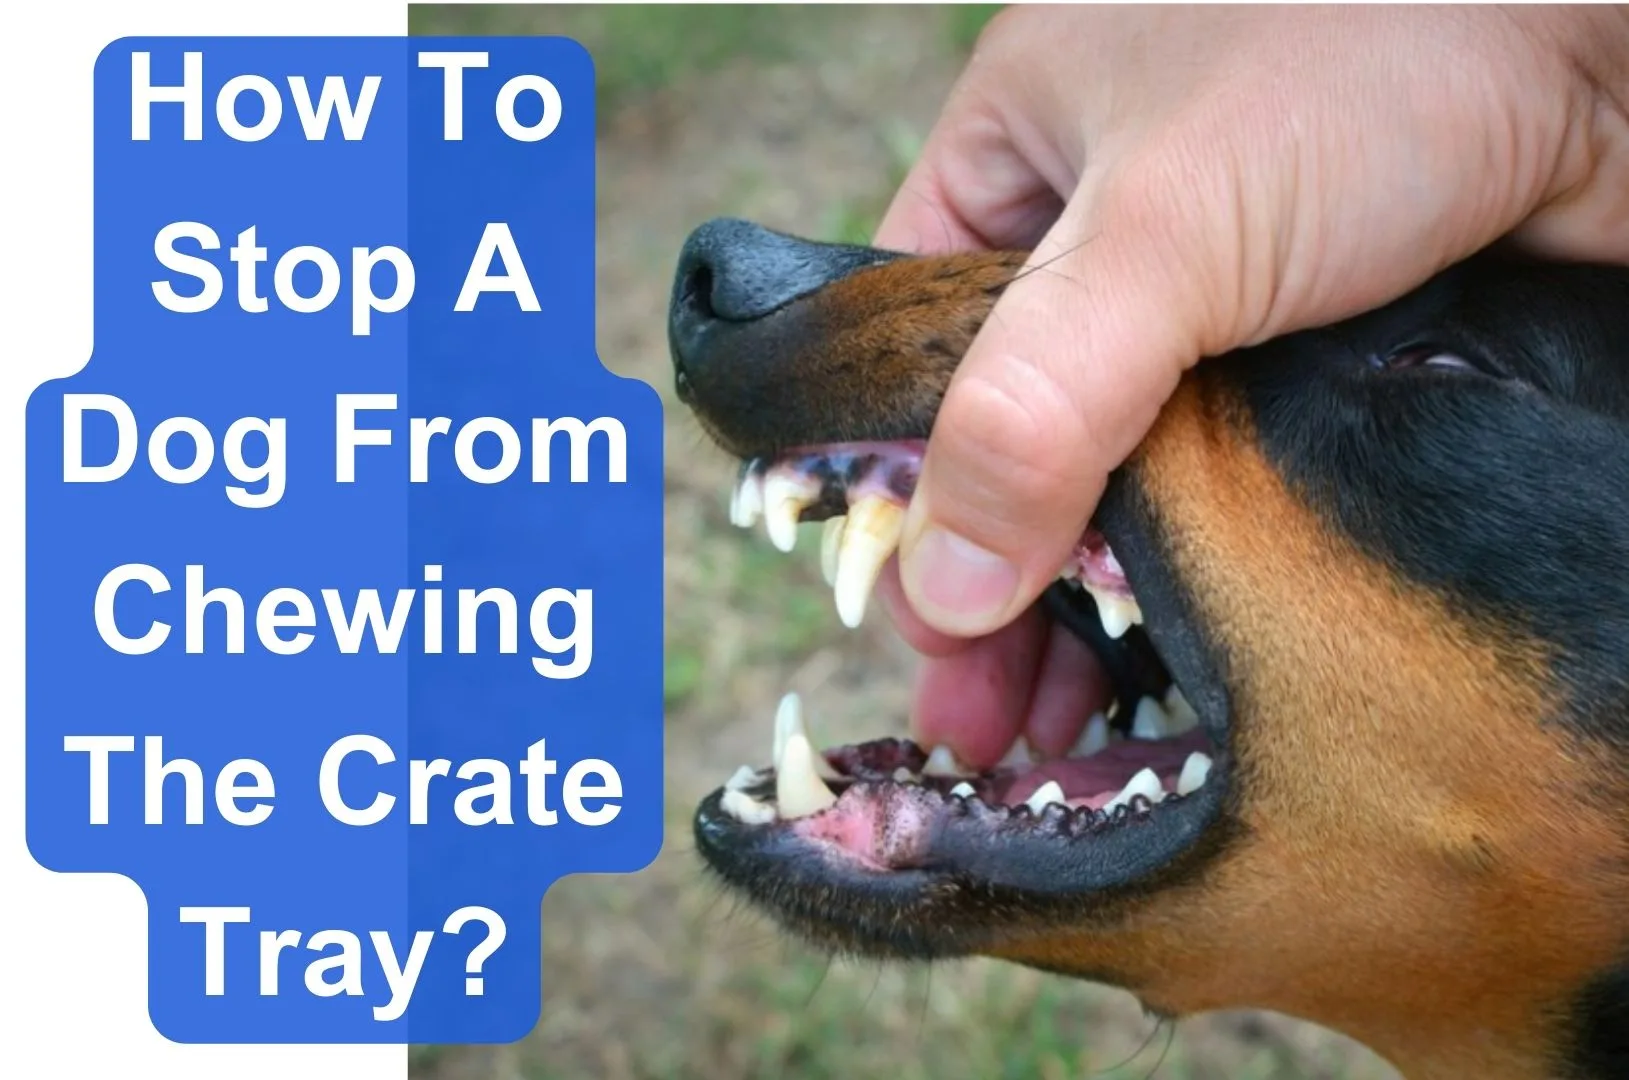 How To Stop A Dog From Chewing The Crate Tray